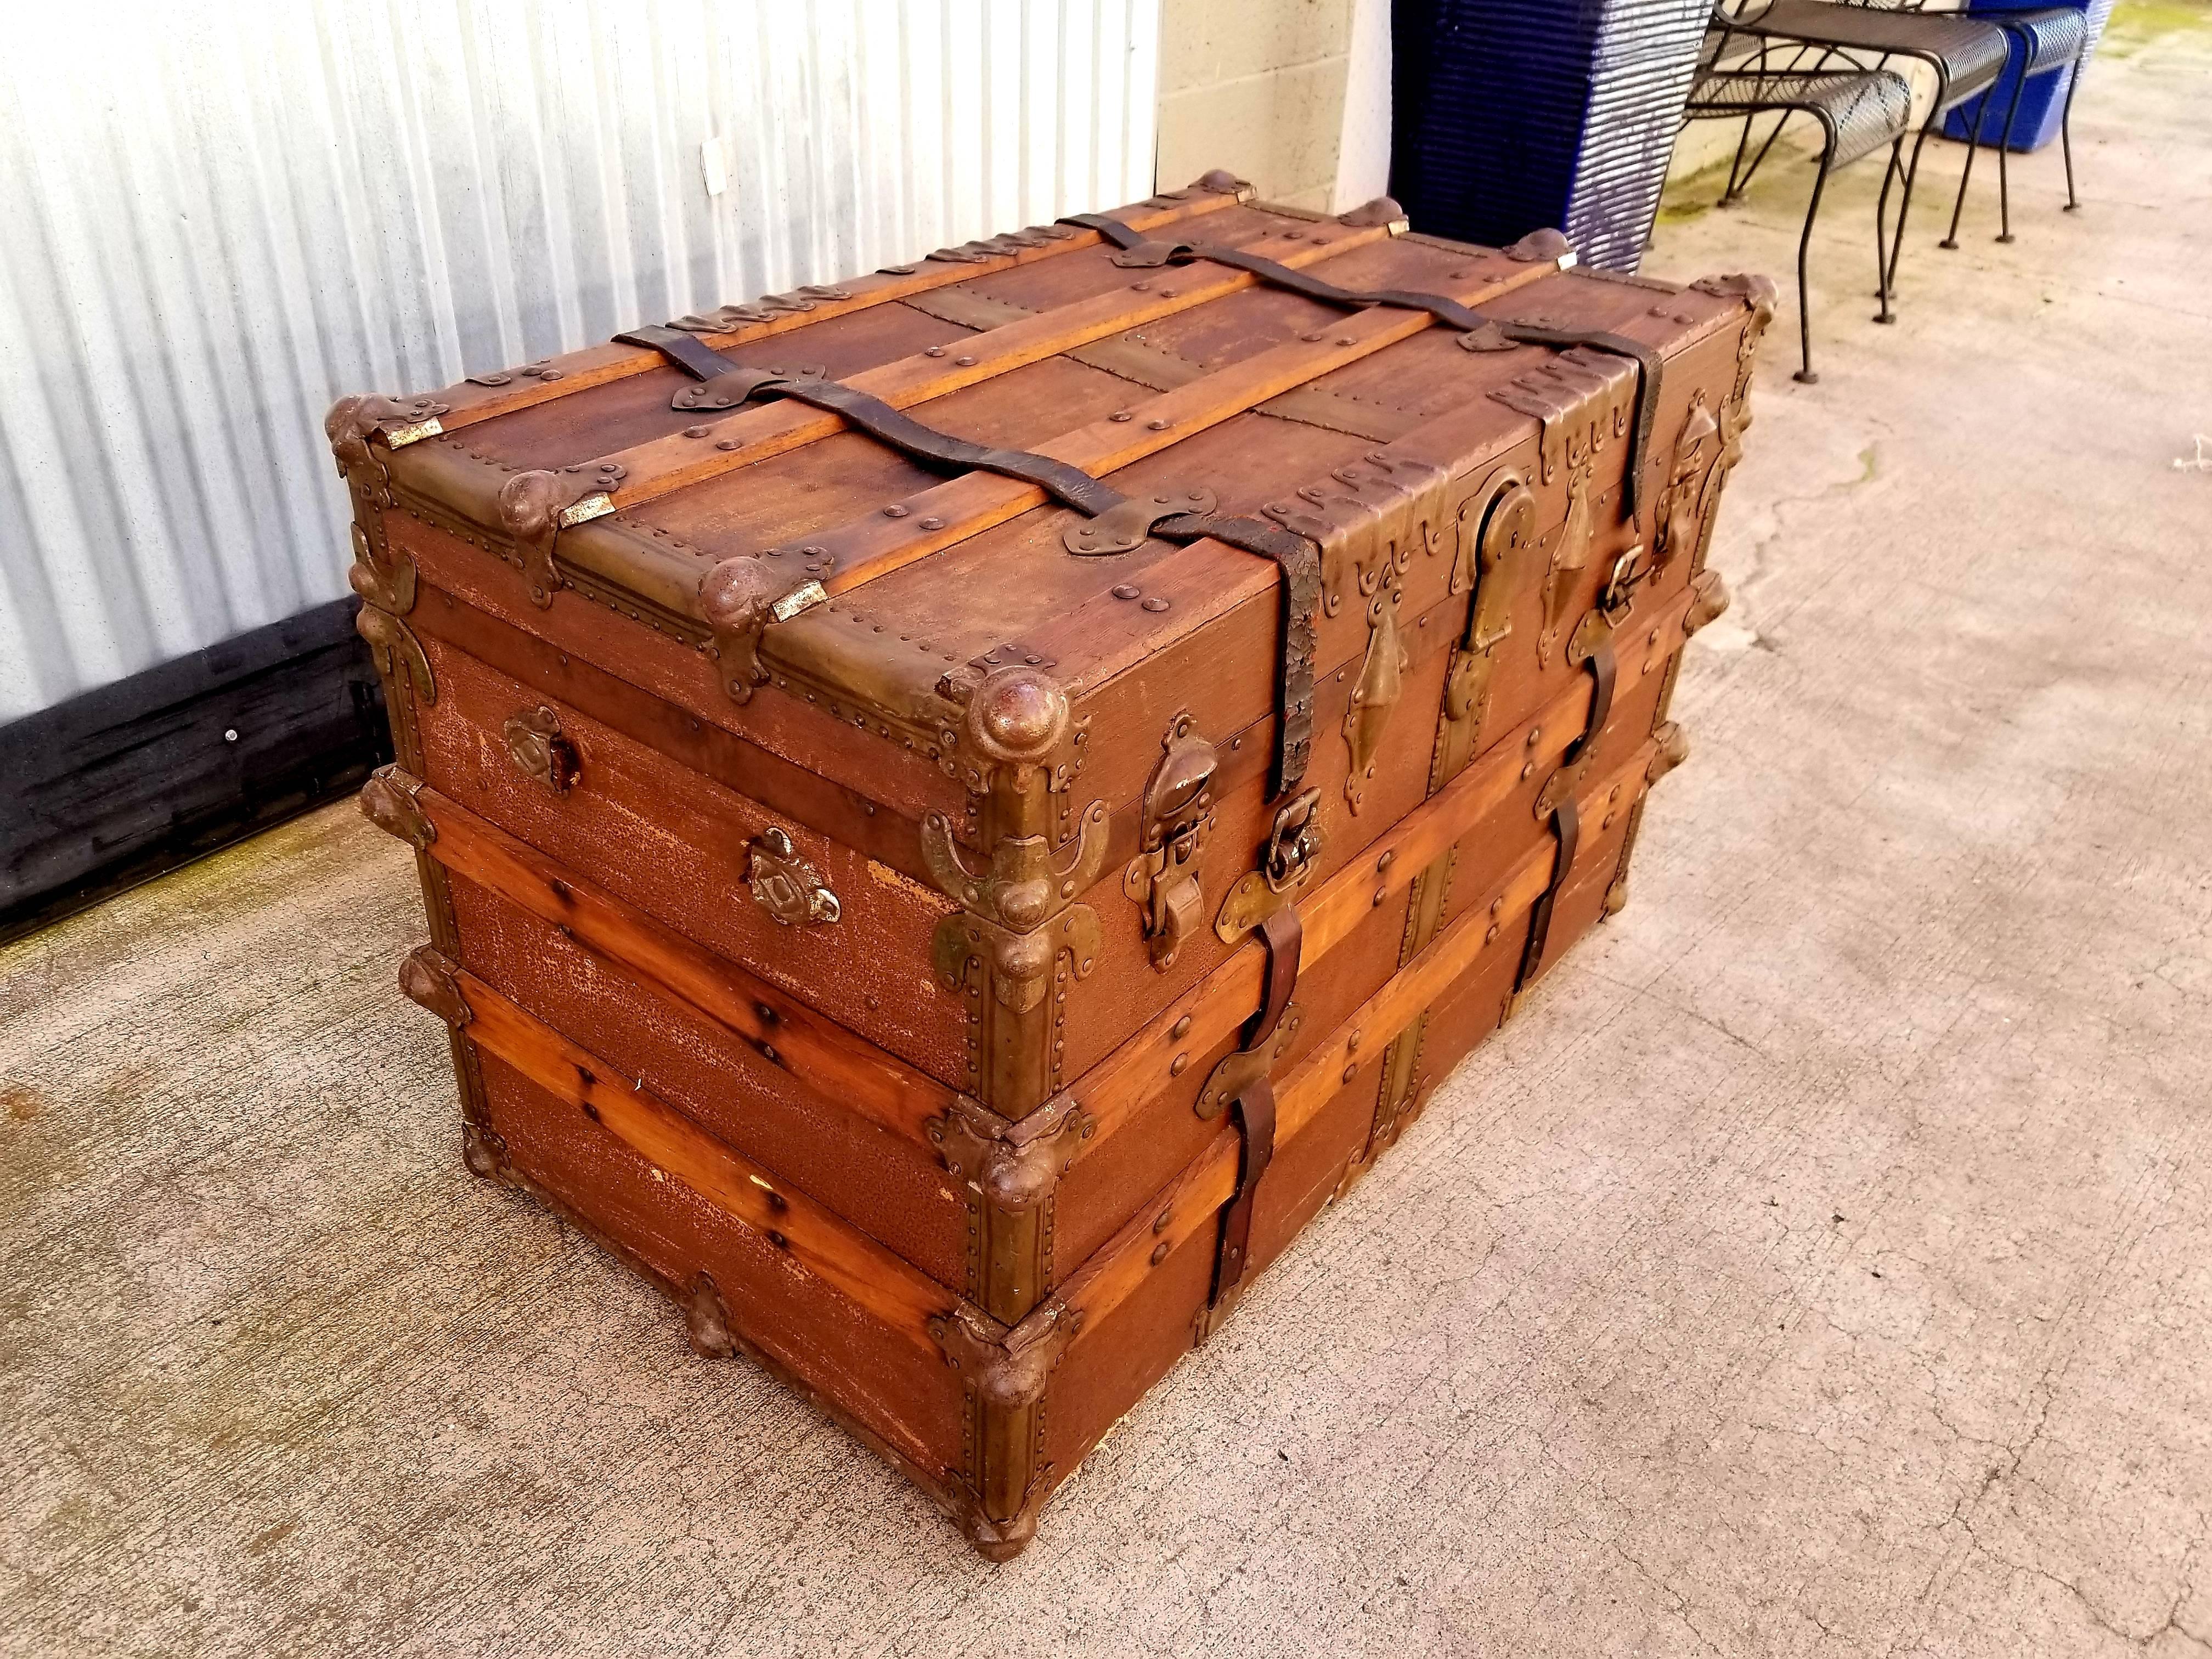 Early 20th century steamer trunk with beautiful patina to original finishes. Leather straps, steel mounts, canvas clad wood frame. Retains interior tray. Handsome piece with lots of character and old world, industrial charm.